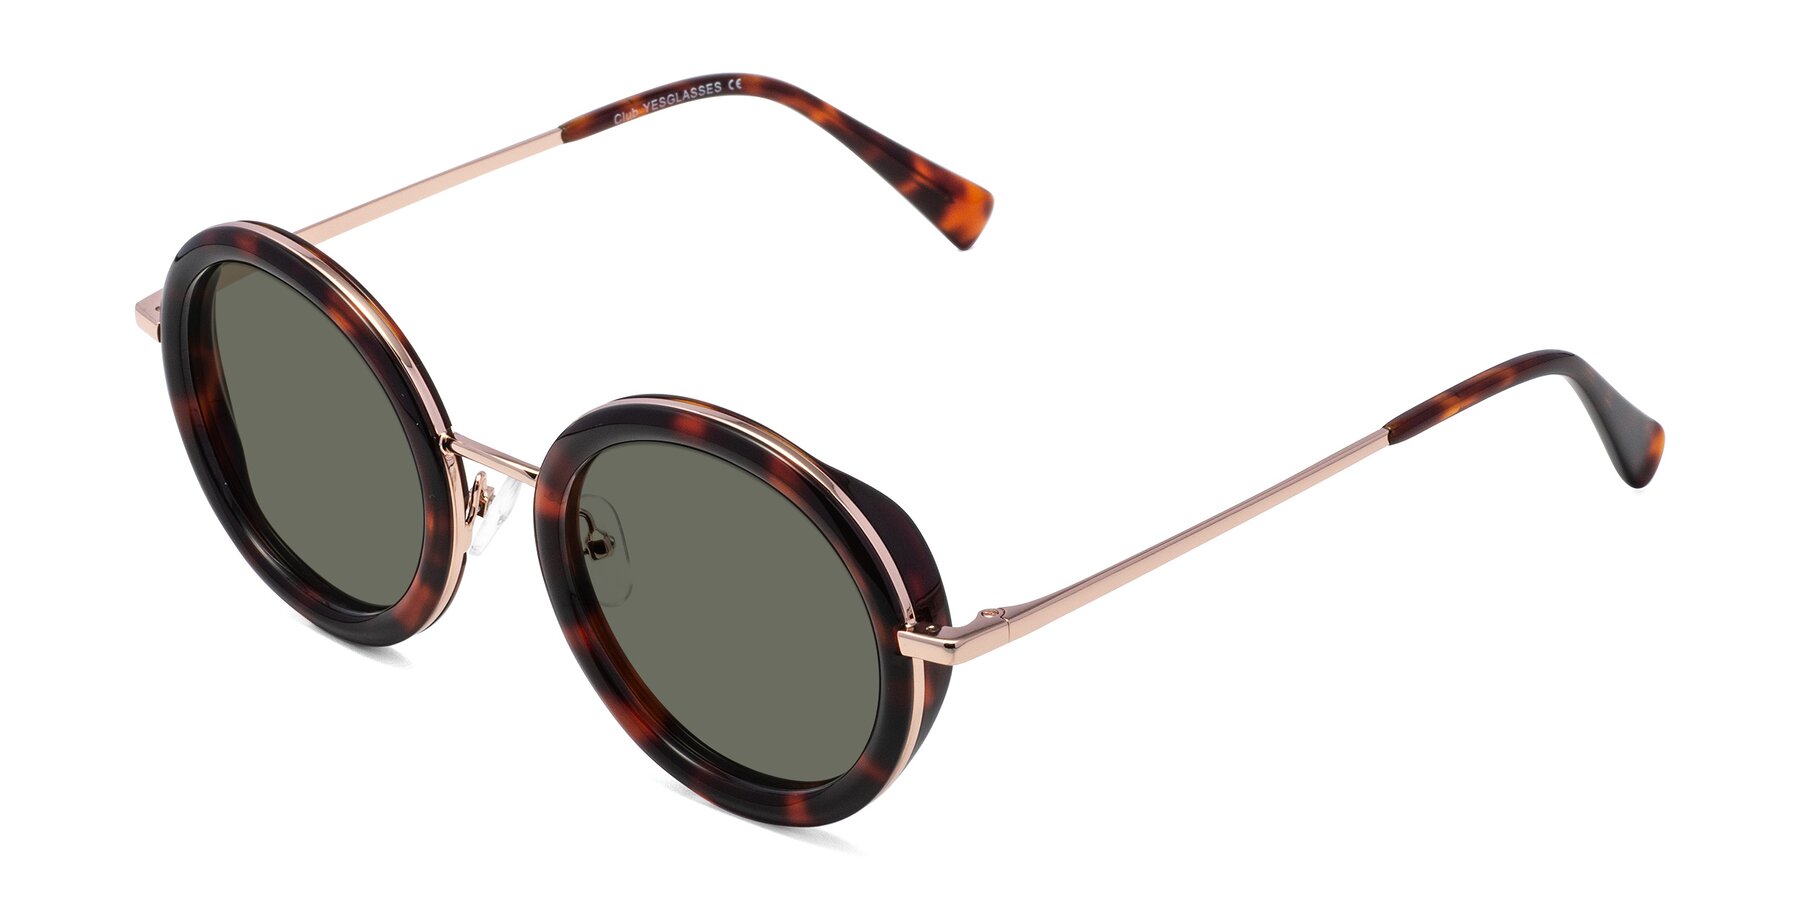 Angle of Club in Tortoise-Rose Gold with Gray Polarized Lenses